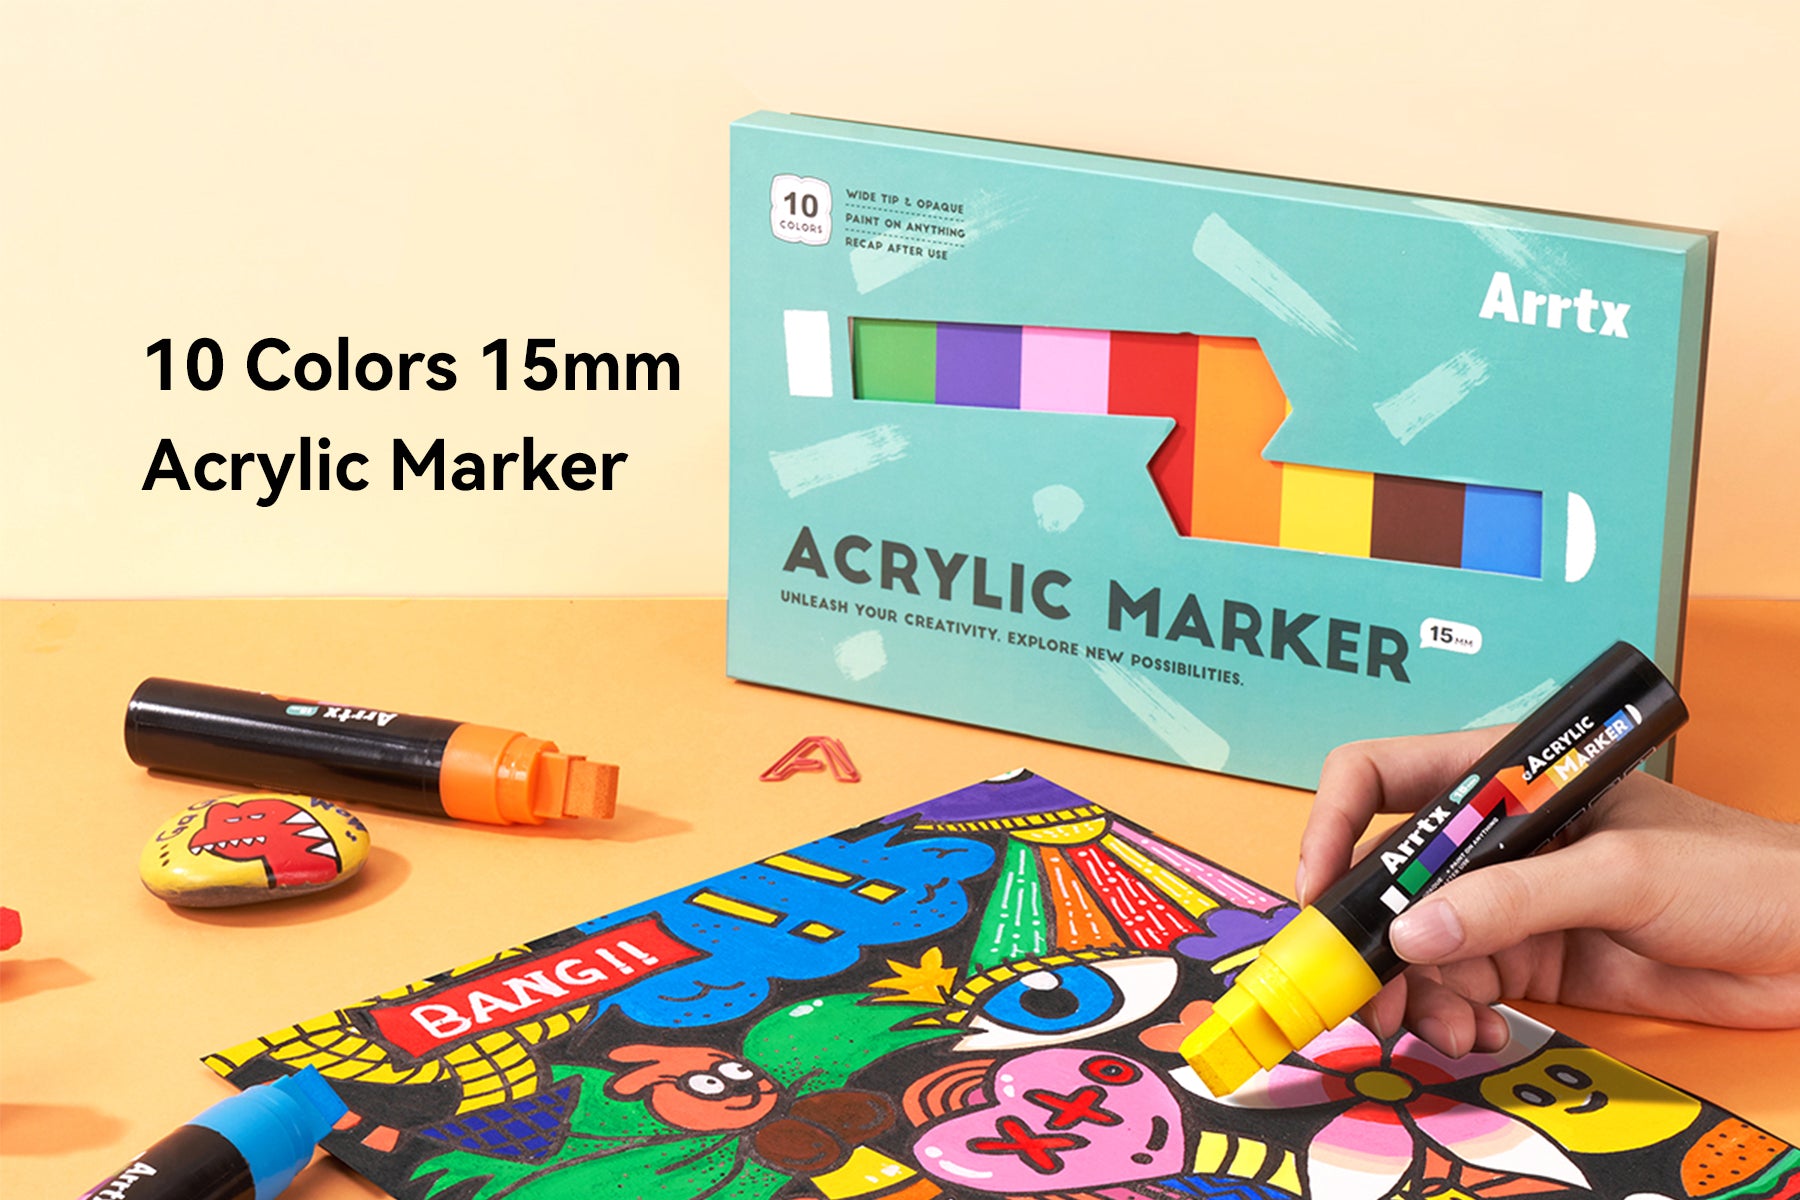 Arrtx 15mm Acrylic Jumbo Marker is HERE!!! 💡  Unleash Creativity on a Whole New Scale!